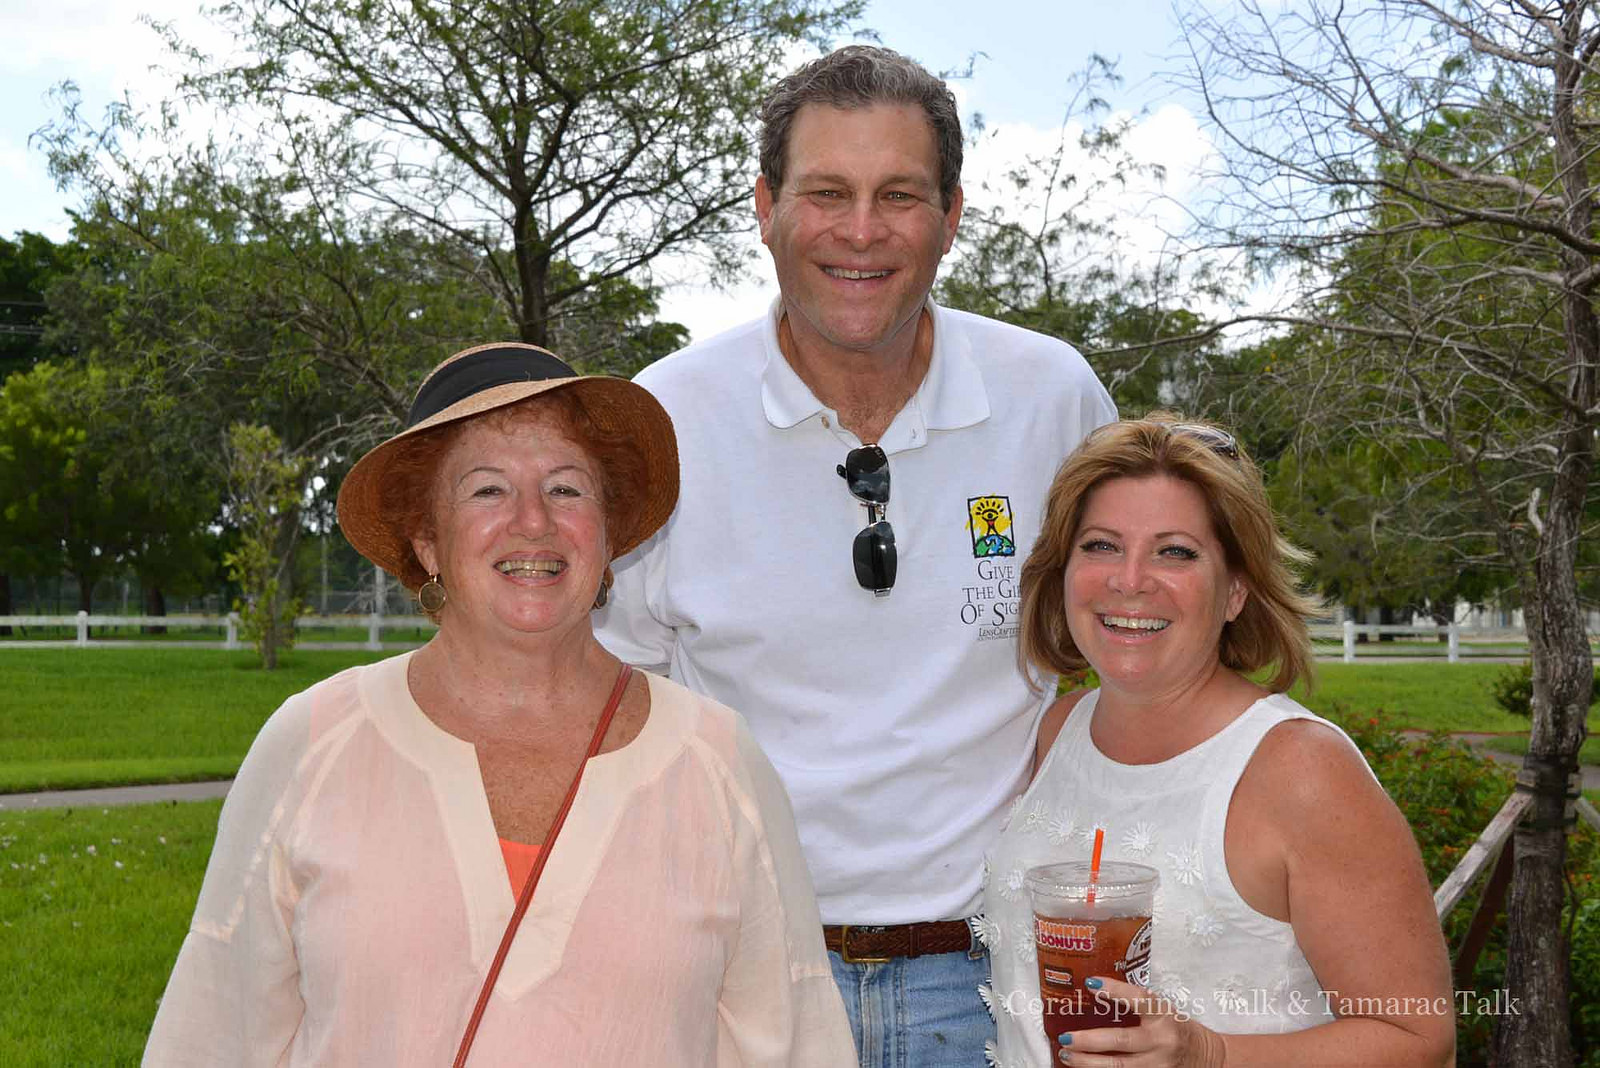 Mitch Ceasar with Broward County Commissioner Stacy Ritter (on right)